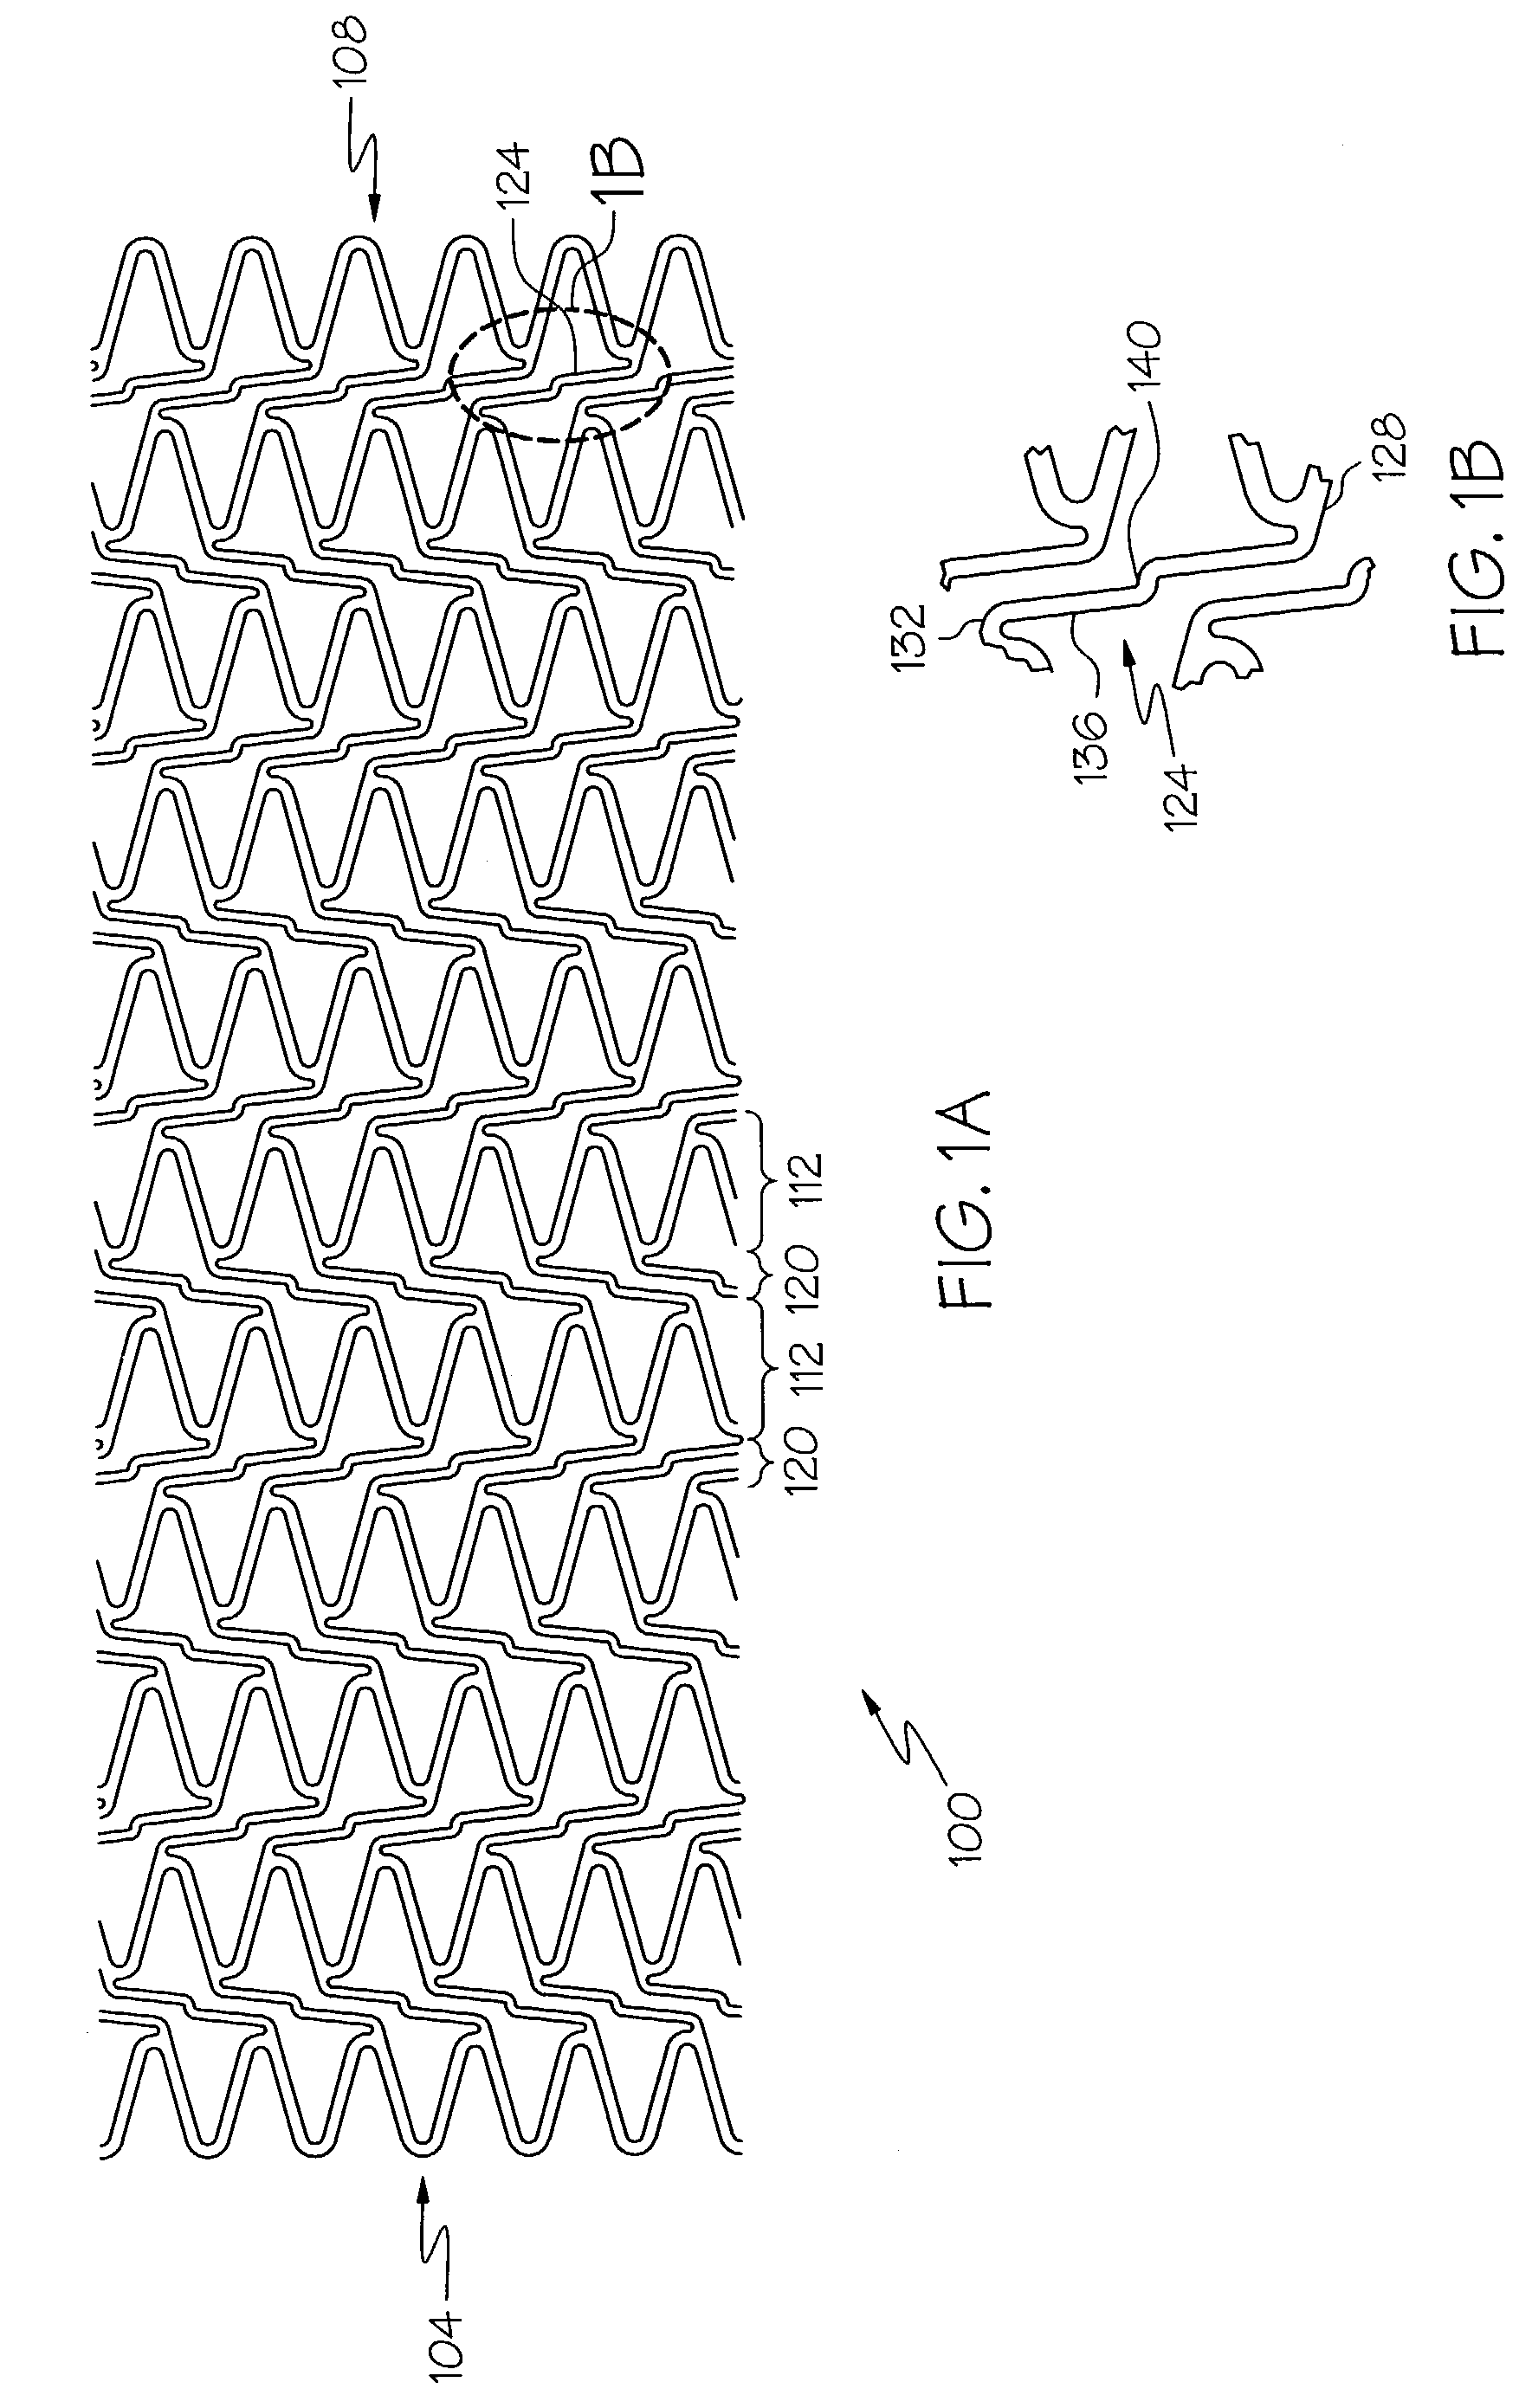 Stent with stepped connectors